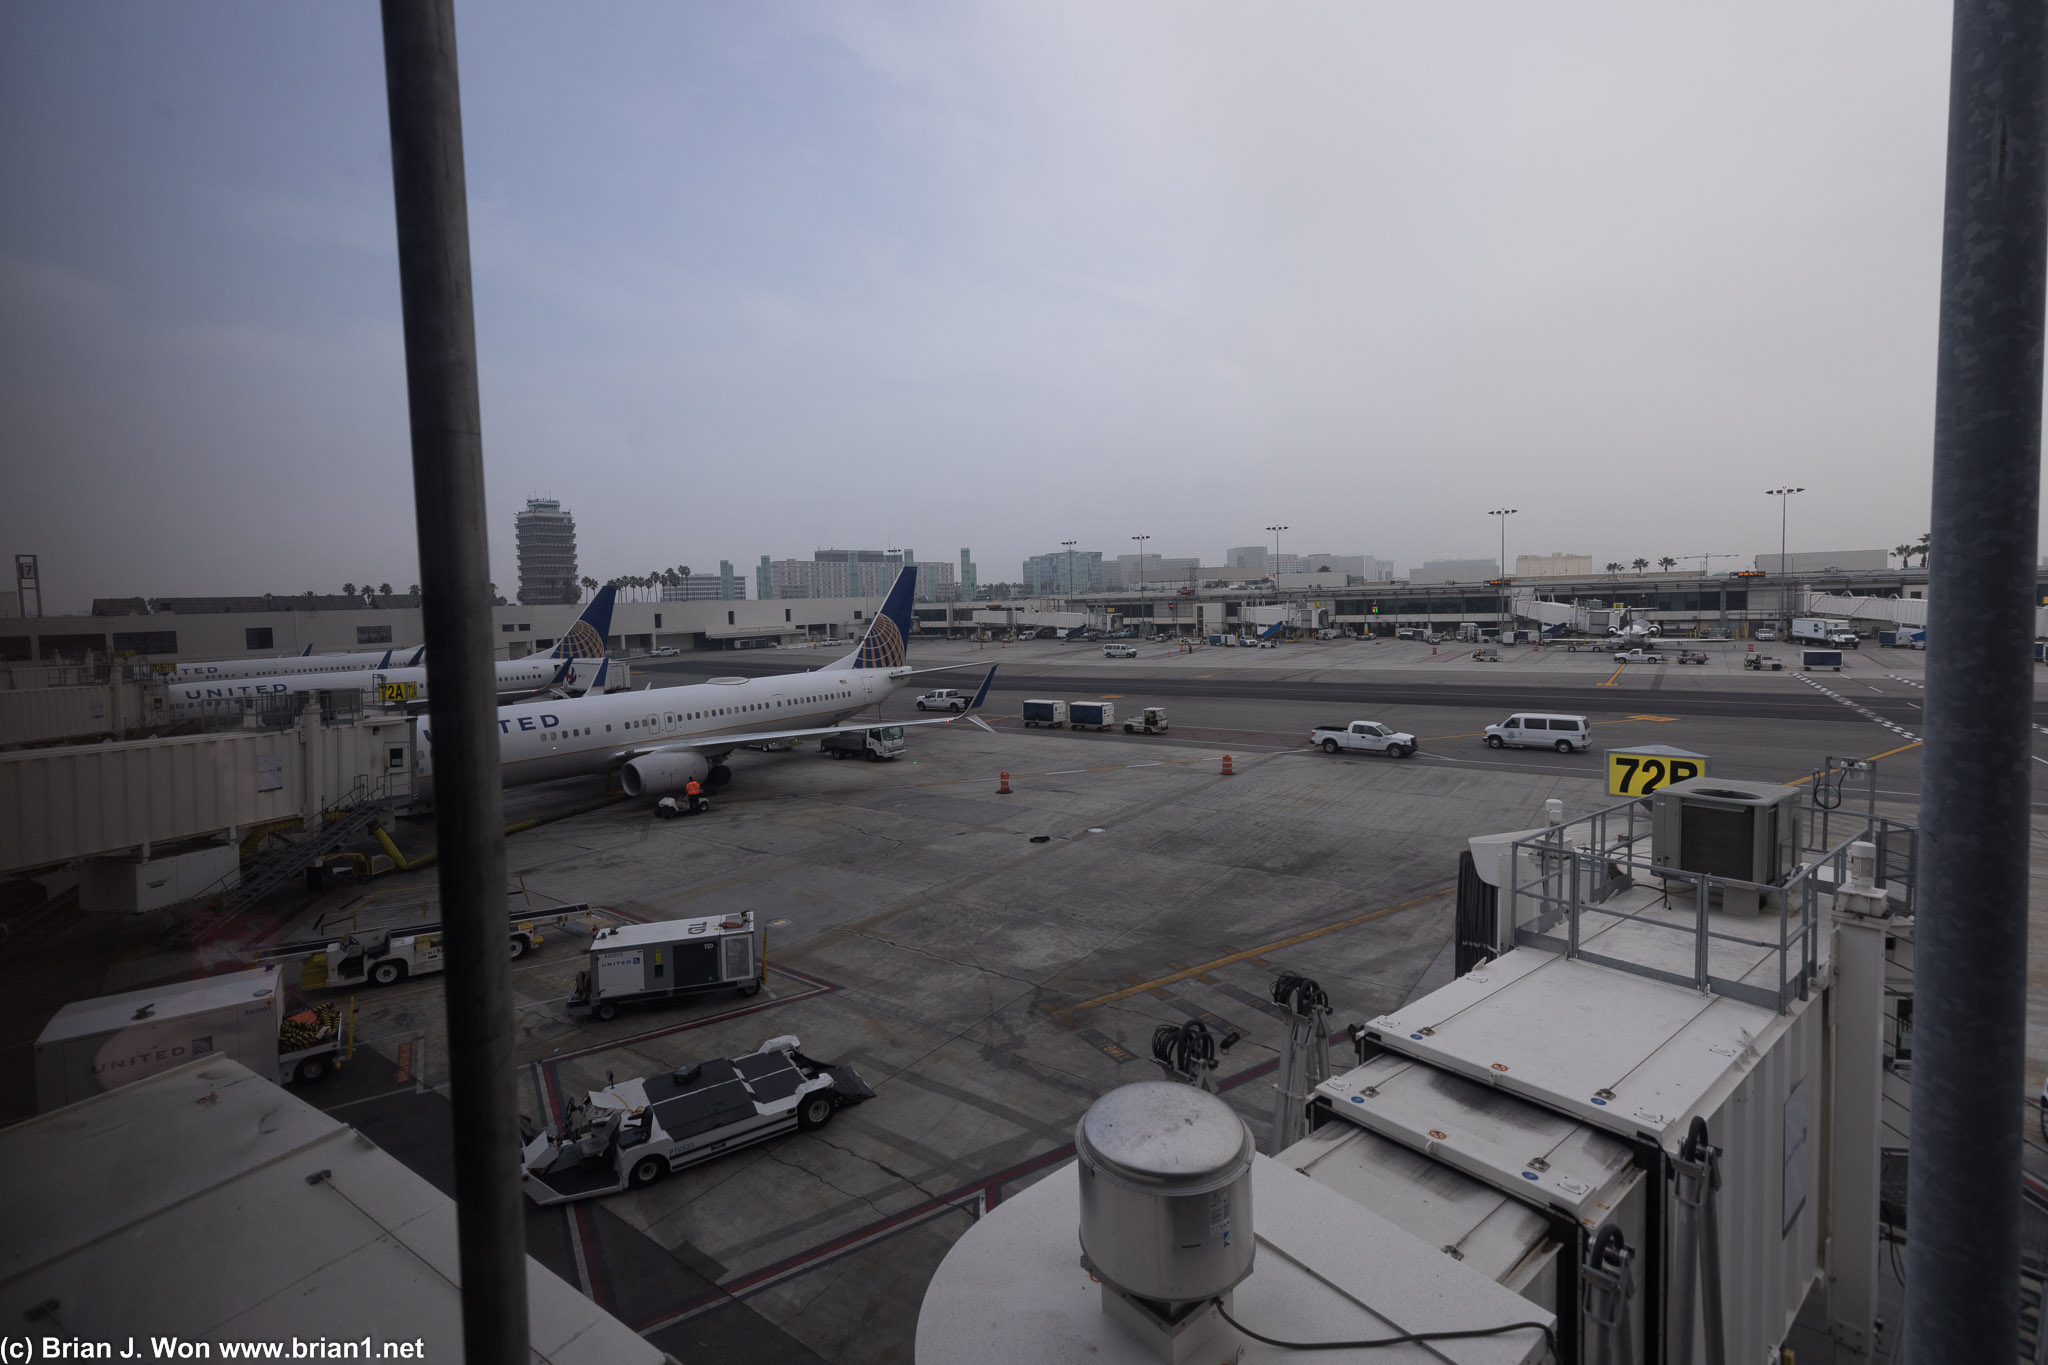 The other view, this time towards Terminal 8.